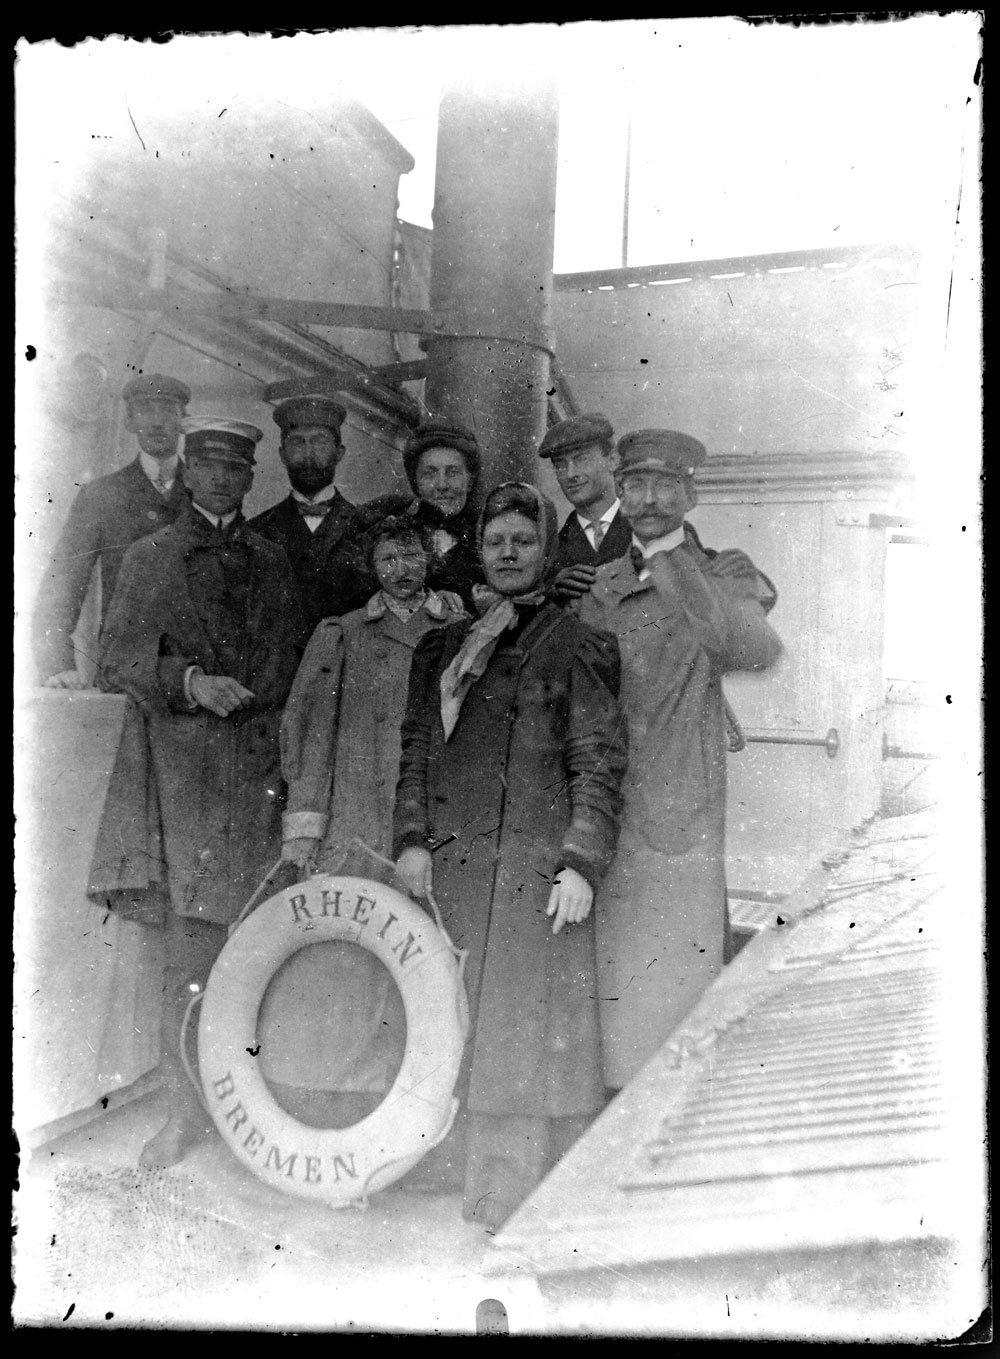 In 1907 my paternal Grandfather came to America aboard the ship Rhein which traveled from Bremerhaven (Bremen, Germany) to New York City.  The ship left on April 28th and arrived on May 13th.  The ship had been built eight years before and carried 369 second class passengers and 3082 in third class (there were no first class accommodations).

This picture was digitized from one of three 3x5 inch glass negatives that he took while onboard the ship.  All are a bit overexposed.  I believe that my Grandfather is standing at the left side of the back row.  The gentleman in front of Grandfather and the gentleman on the opposite end appear to be crew members.

Grandfather's arrival was at Ellis Island.  He left his fiancee in Germany and she followed him here two years later.  She arrived in Hoboken, NJ.  As she had no relatives here and since my Grandfather was not yet a naturalized citizen they were married onboard the ship by it's Captain in order to allow her to disembark. View full size.